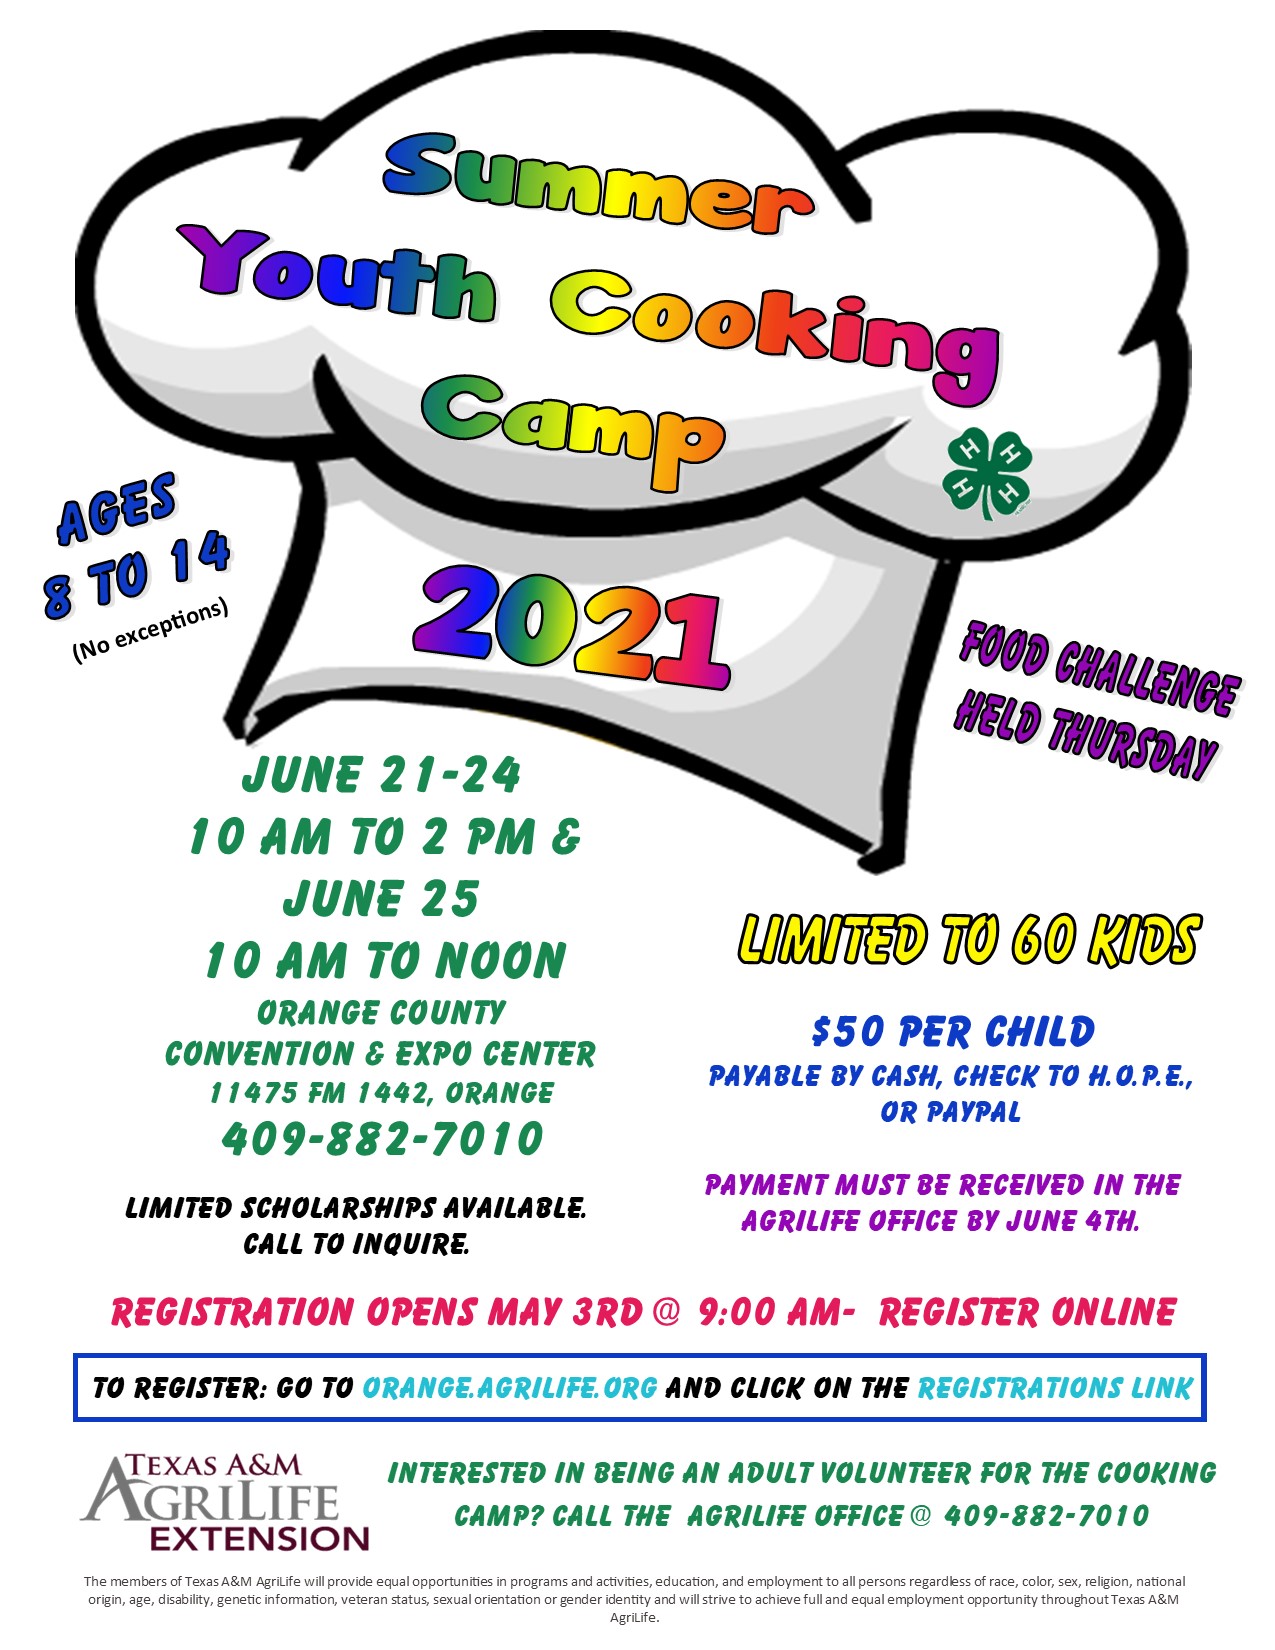 Youth Cooking Camp